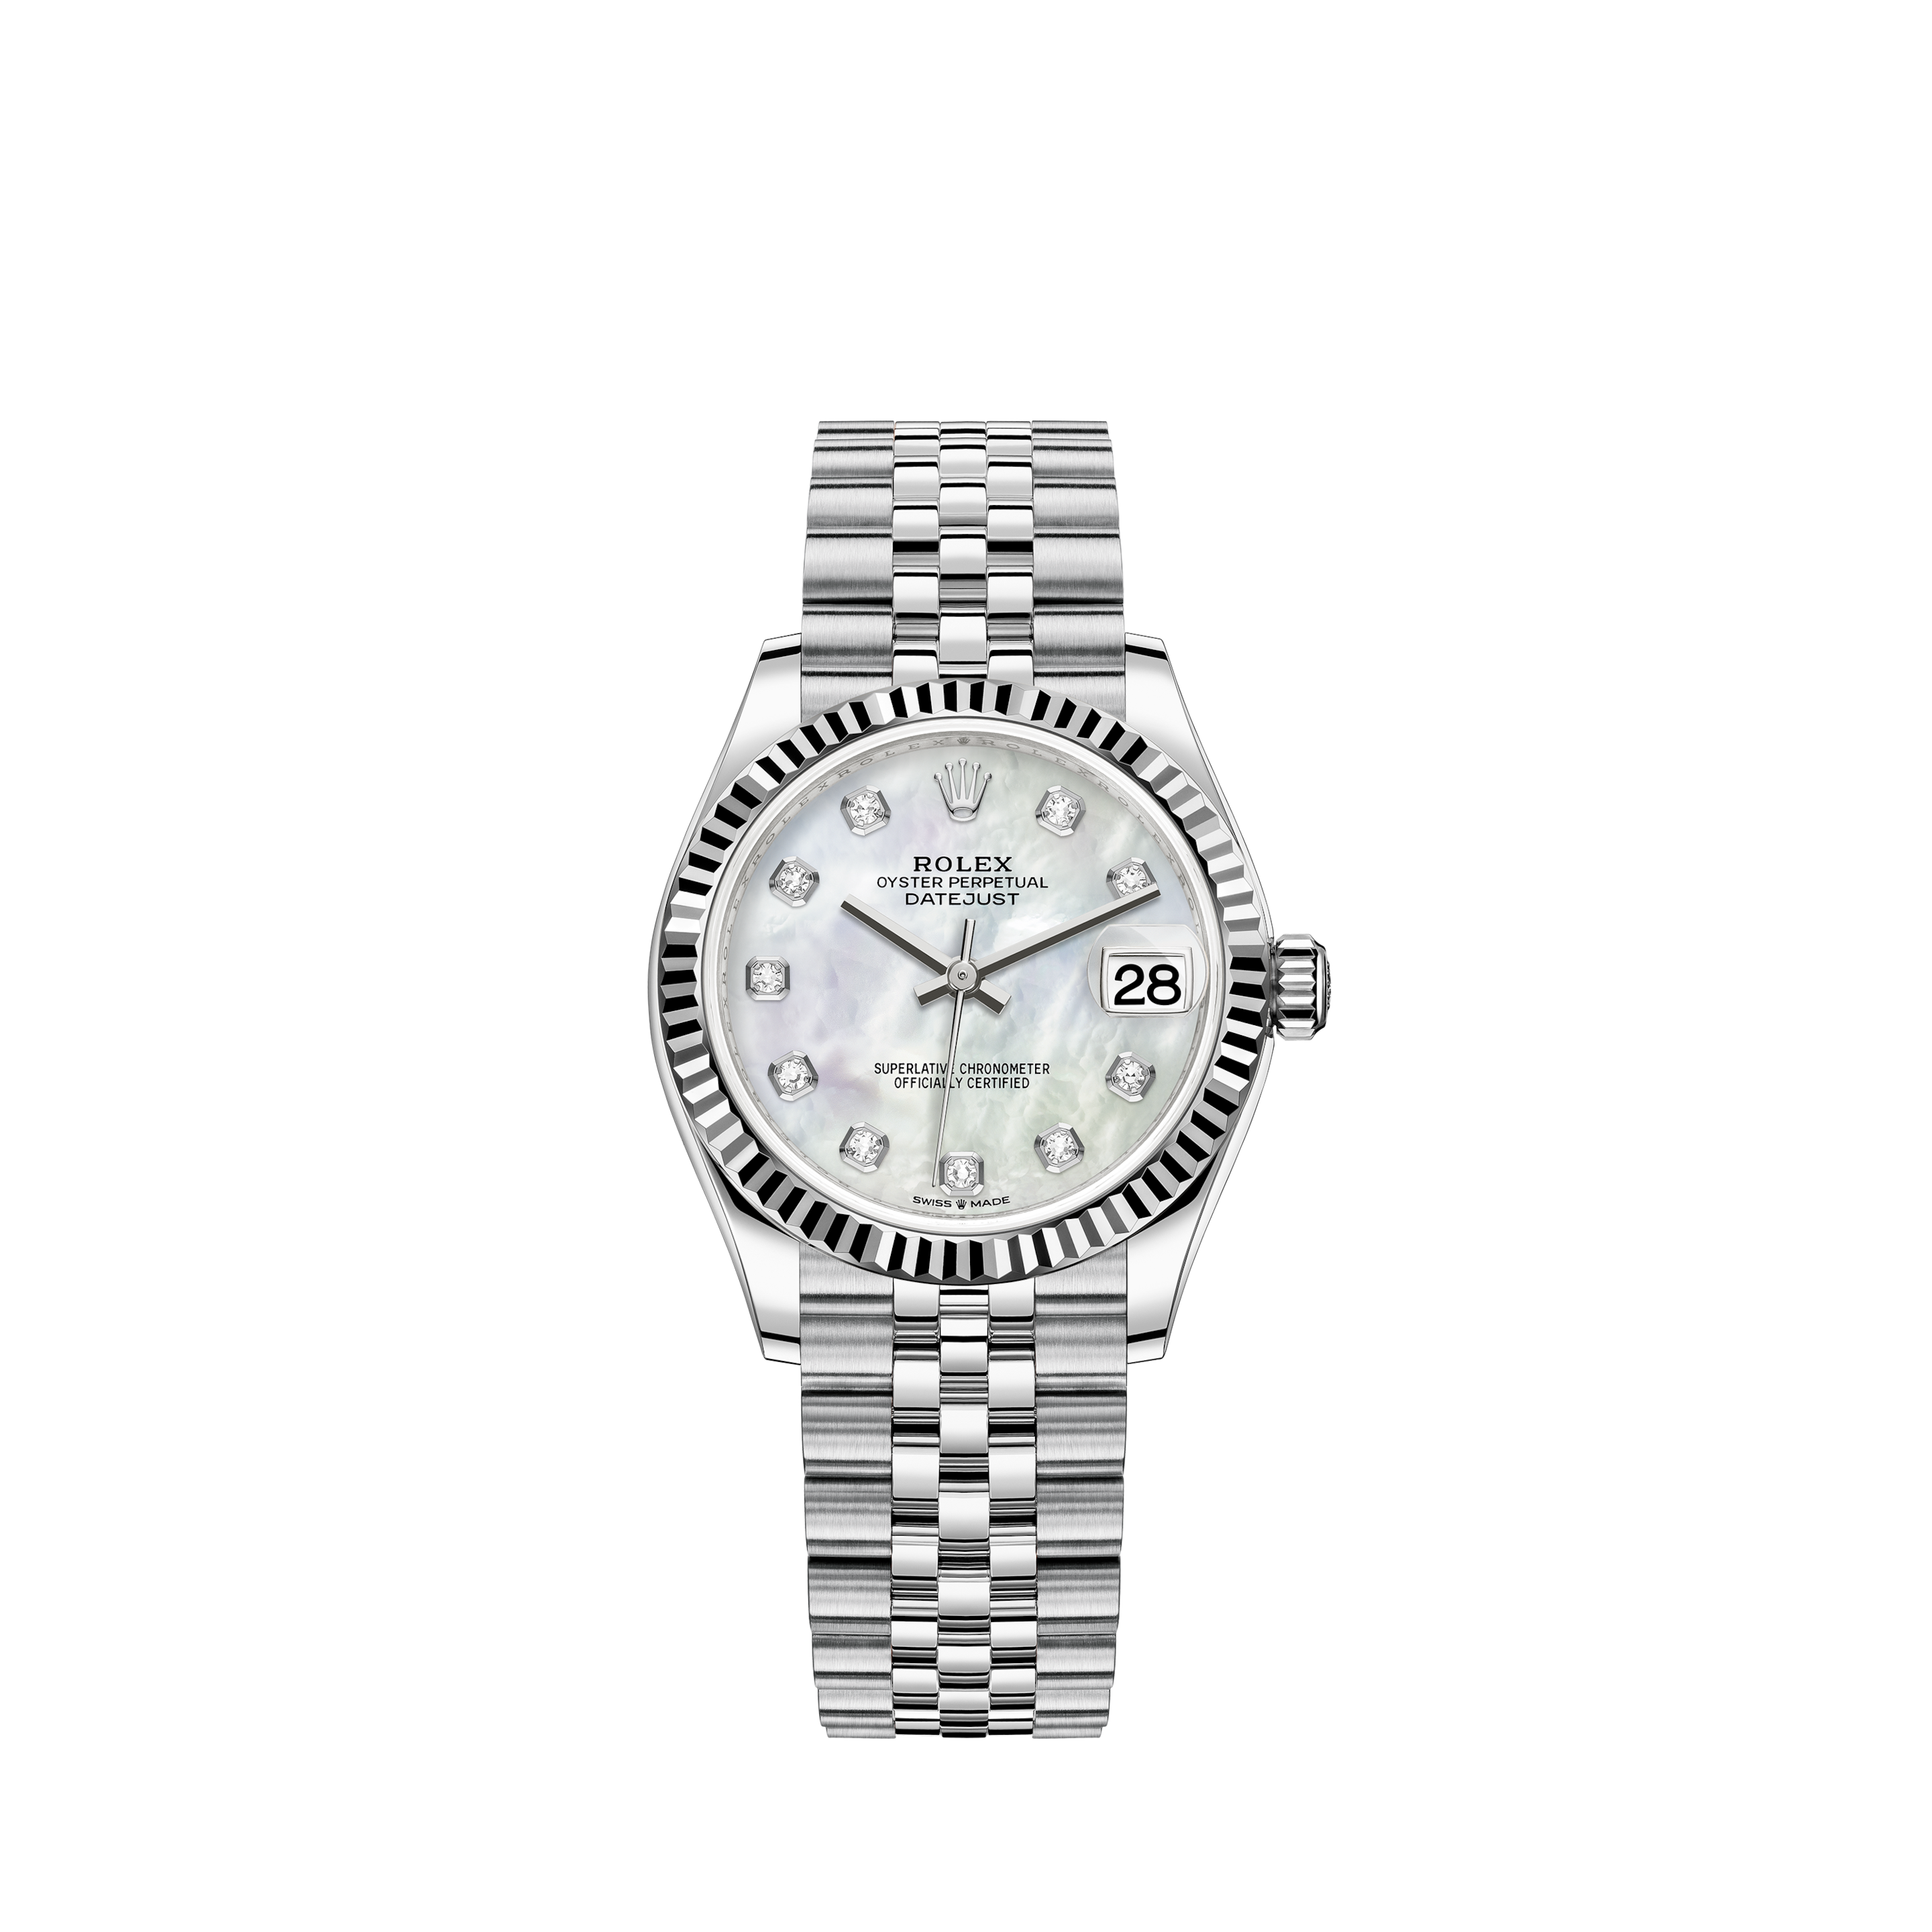 Rolex Men's Customized Rolex watch 36mm Datejust Stainless Steel Grey Color Dial with Diamond Accent RT